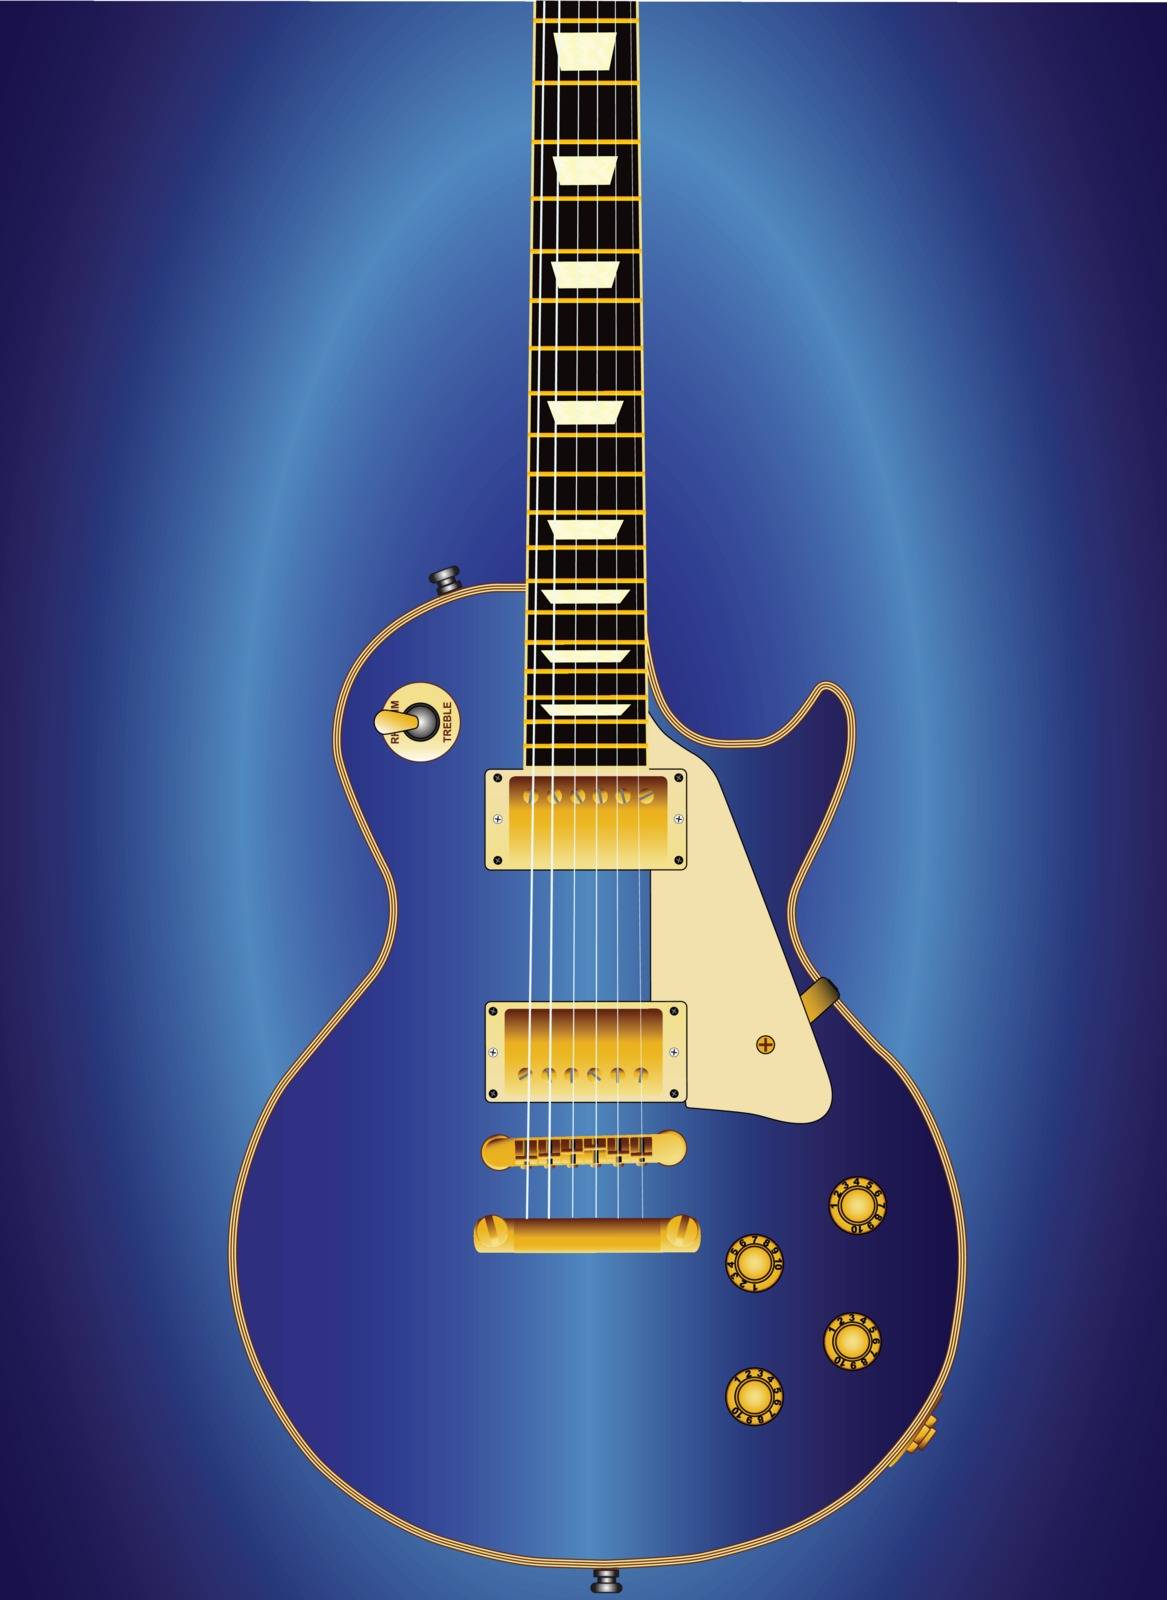 A blue solid electric guitar set on a blue background